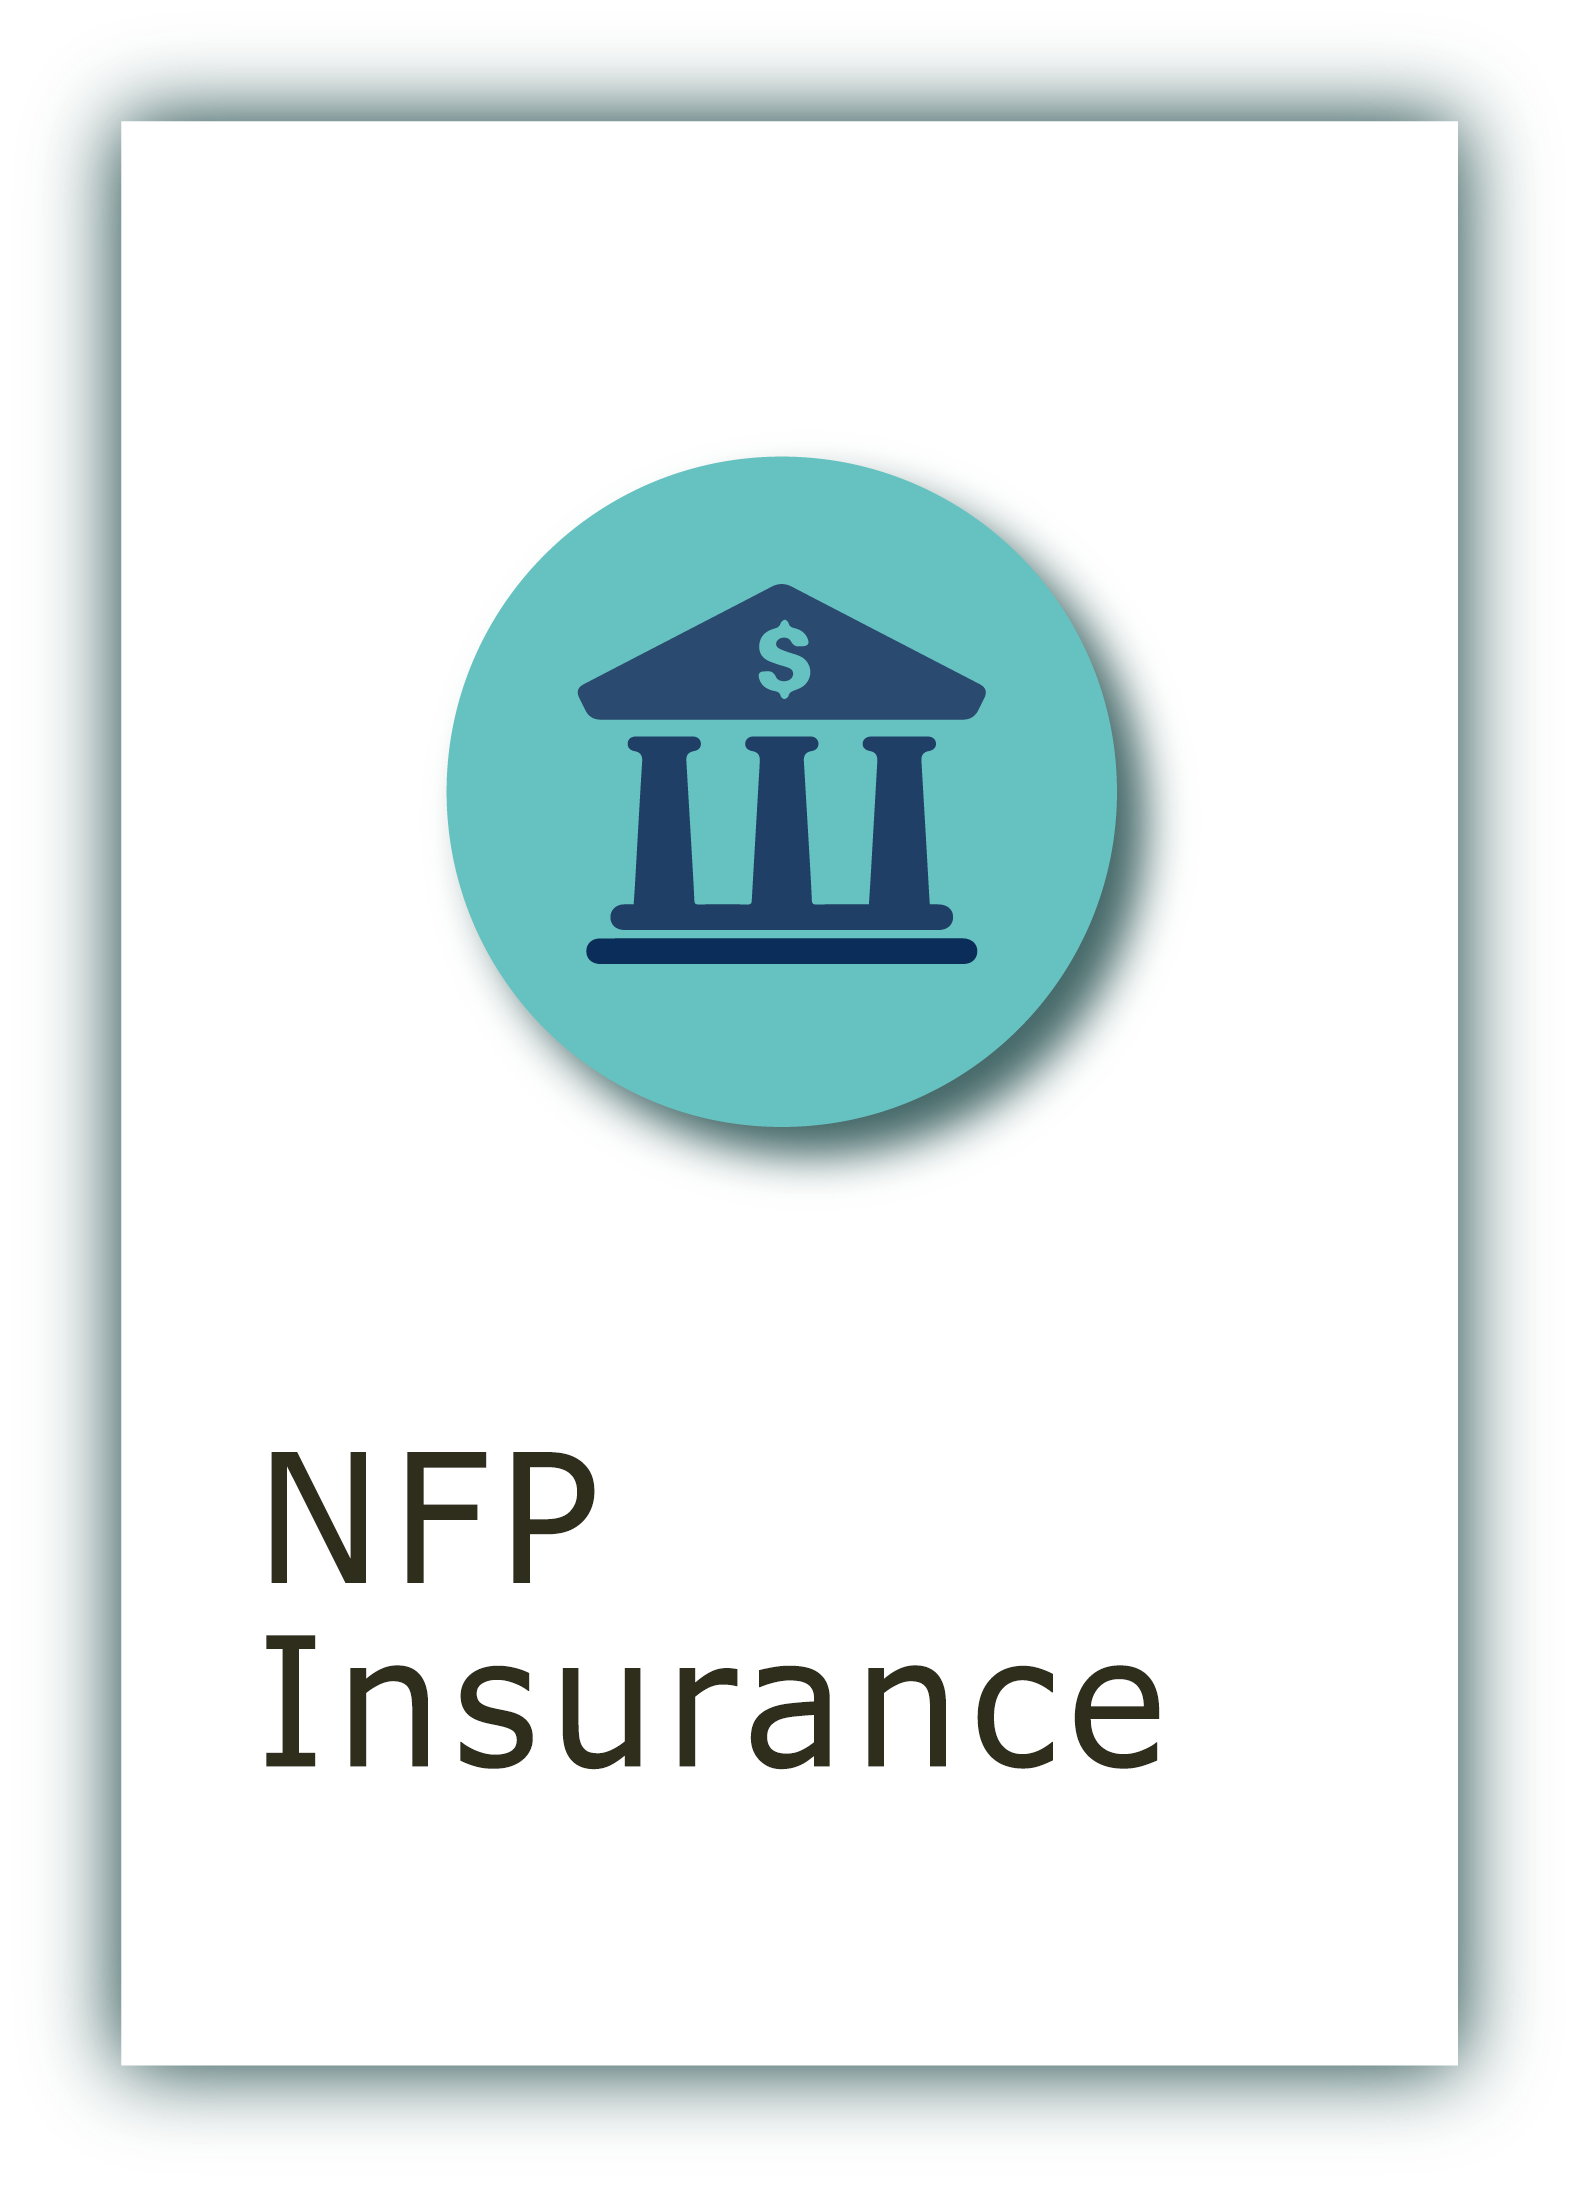 NFP Insurance